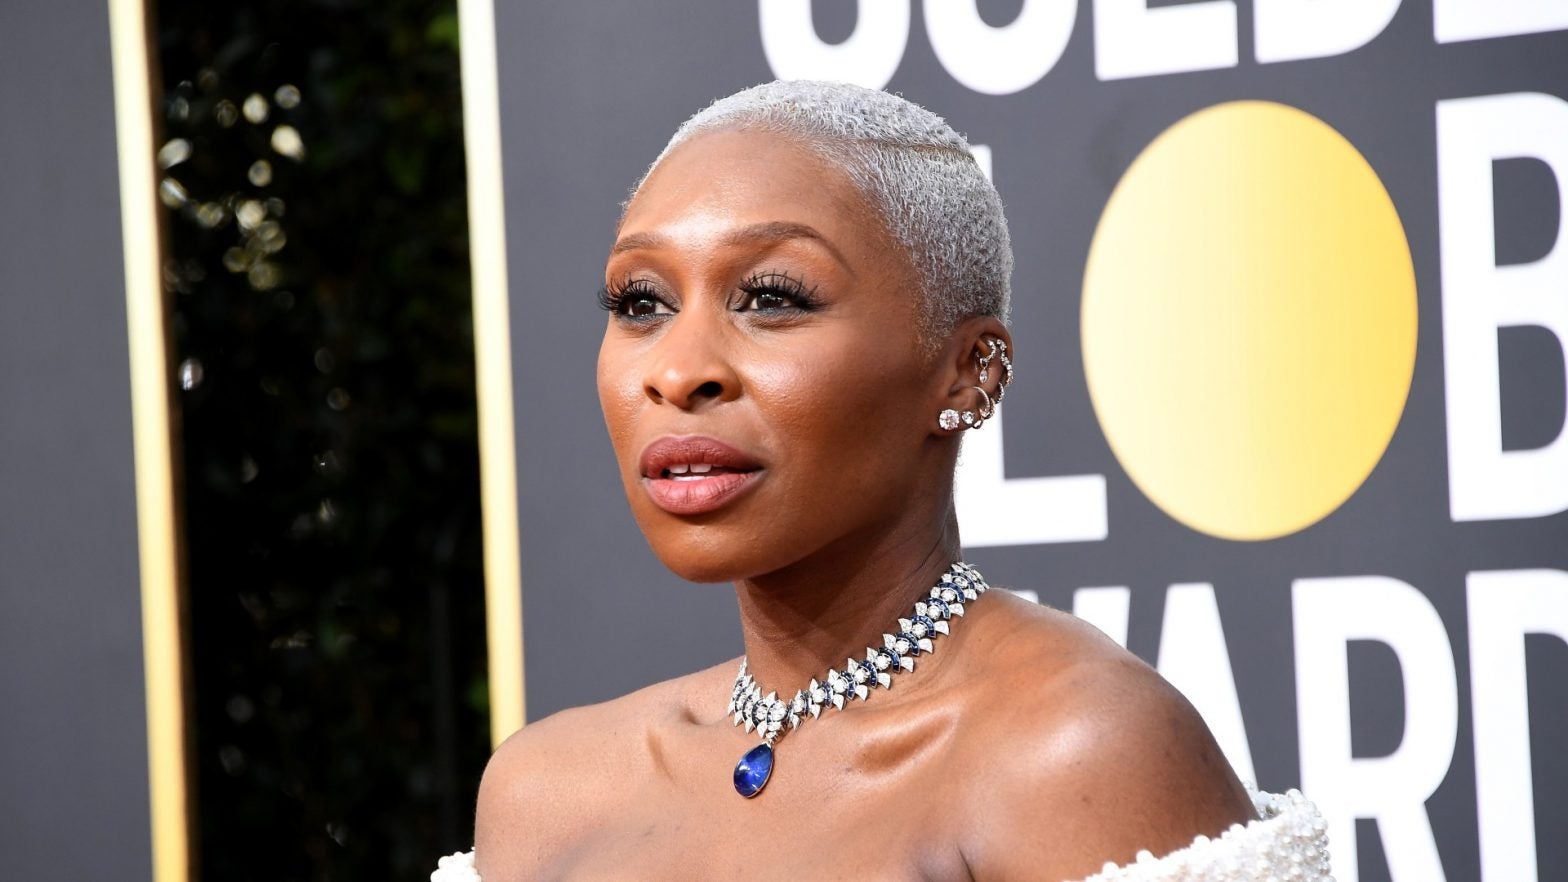 Cynthia Erivo, Wesley Snipes, Billy Porter And More Celebrities Share The Cheat Code To Leveling Up In 2020